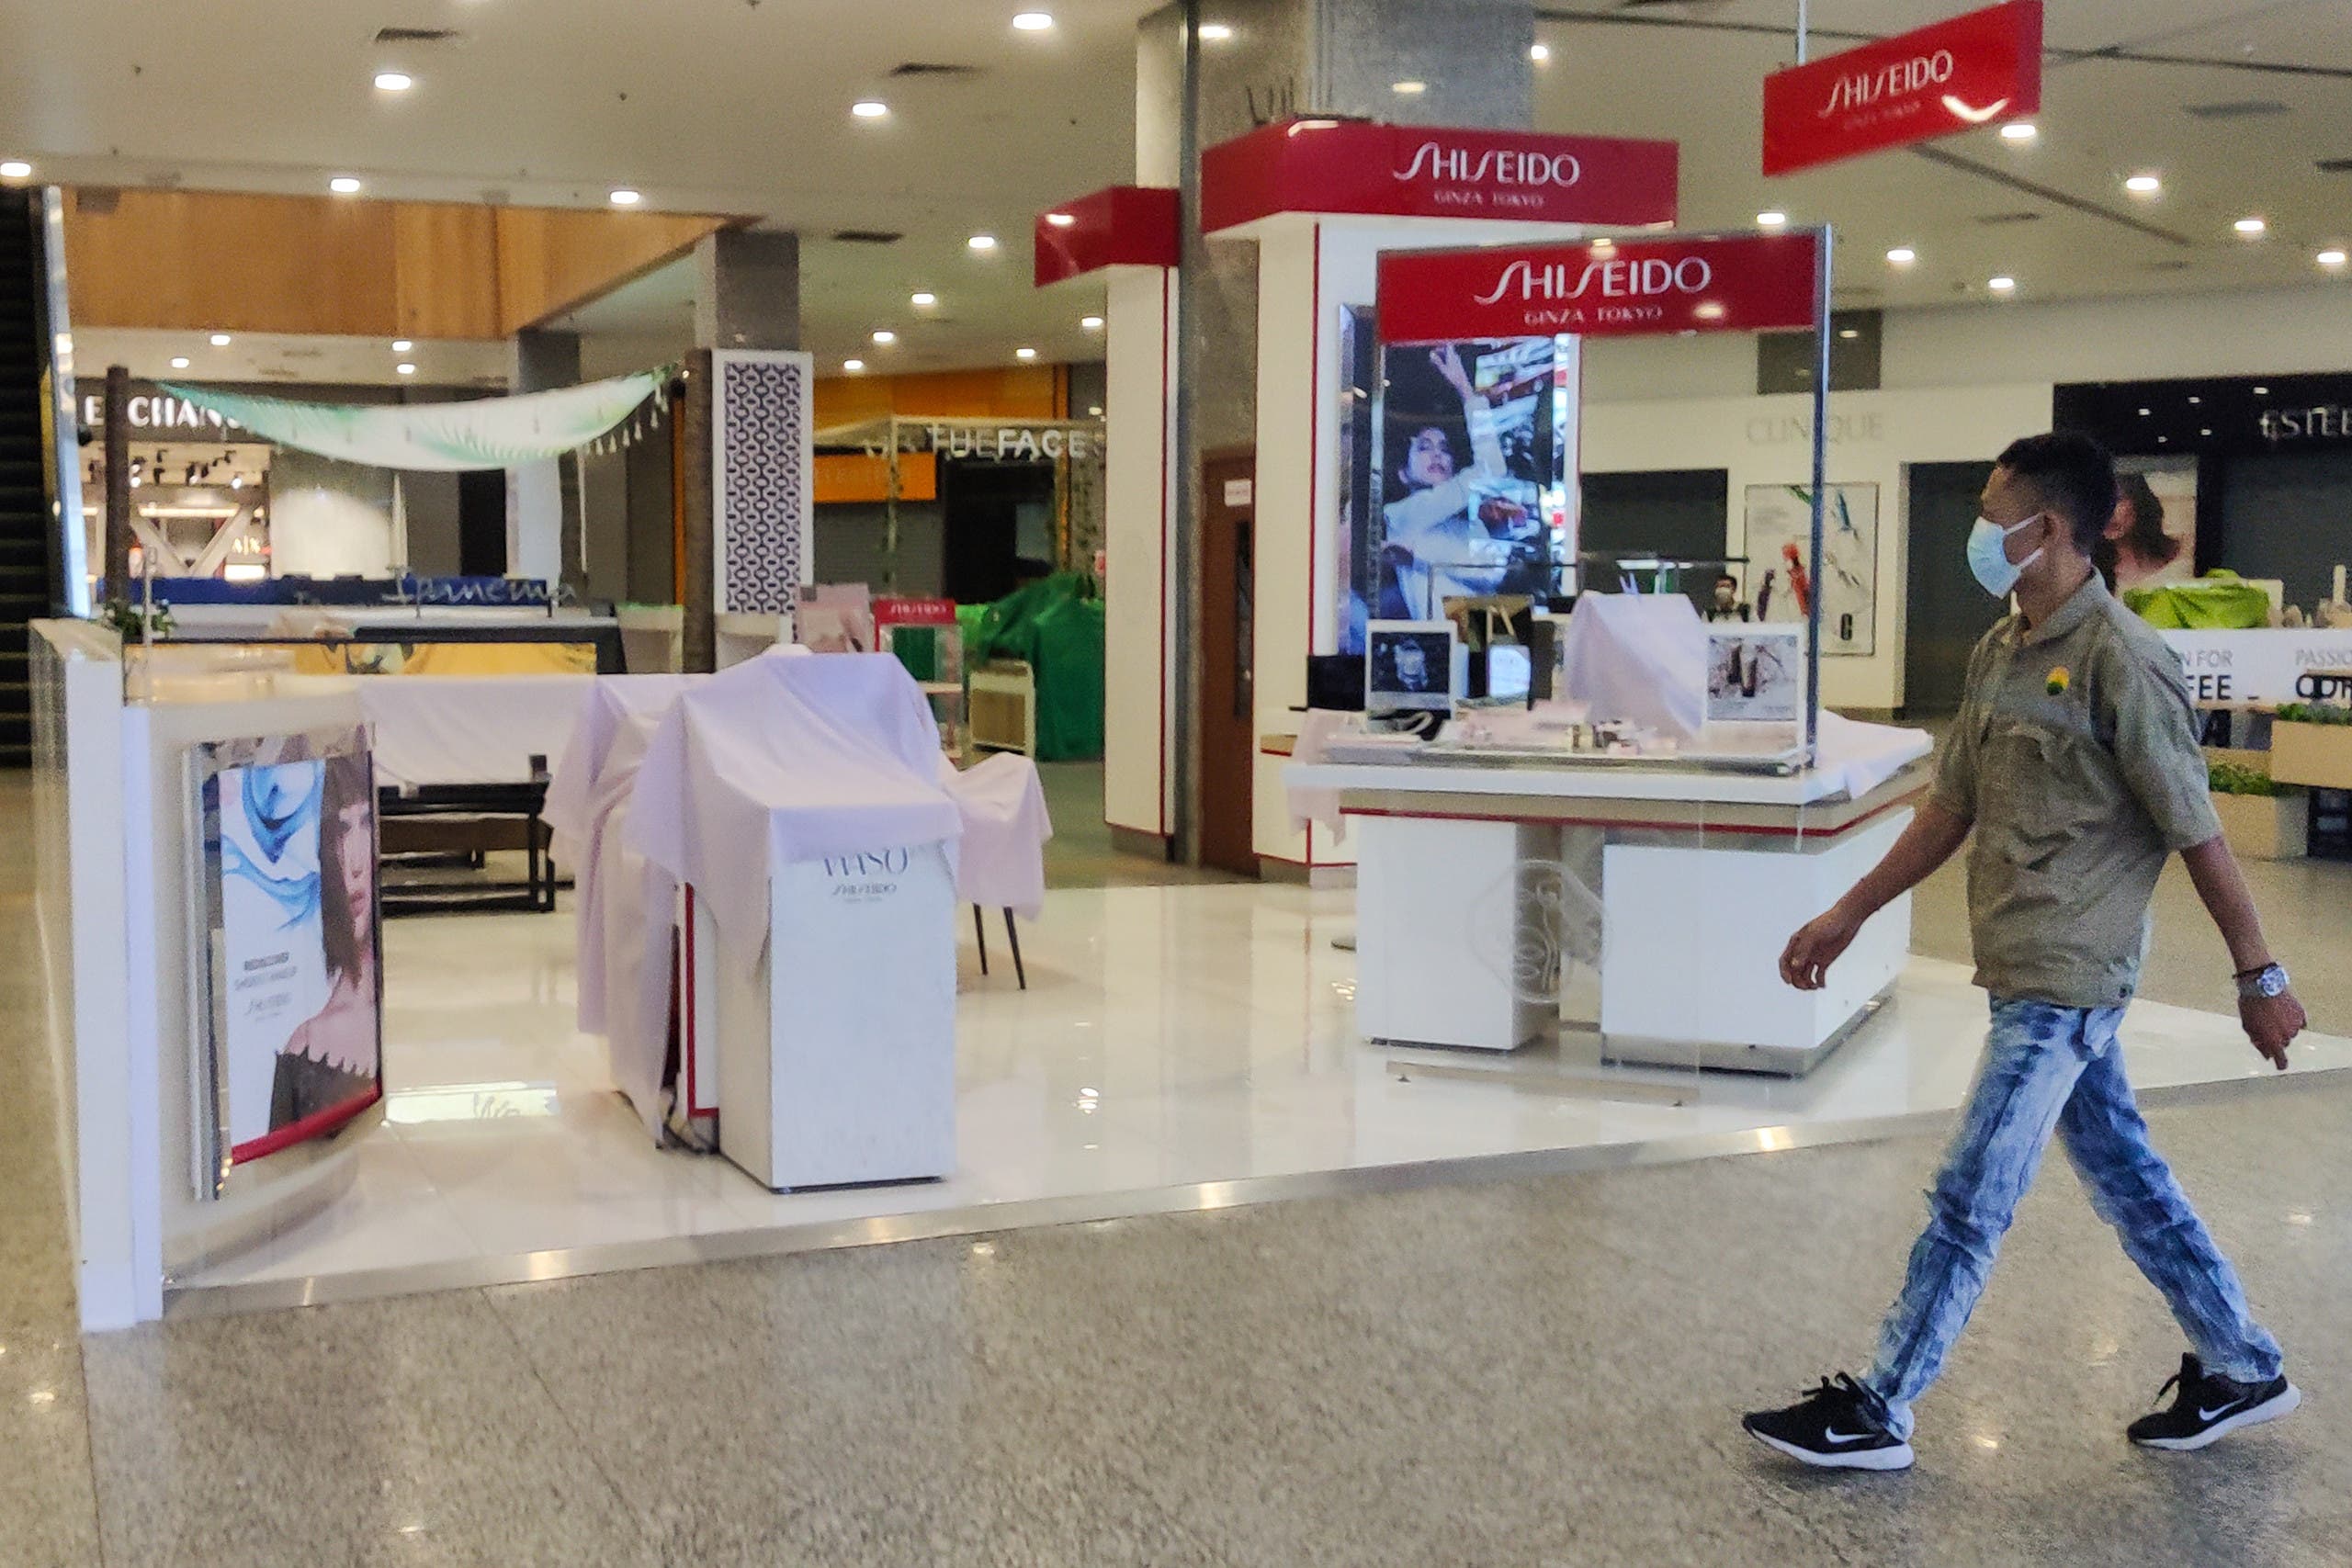 A man walks past a closed cosmetics booth in a shopping center in Yangon on February 1, 2021, after Myanmar's military seized power in a bloodless coup on Monday, detaining democratically elected leader Aung San Suu Kyi as it imposed a one-year state of emergency. (AFP)